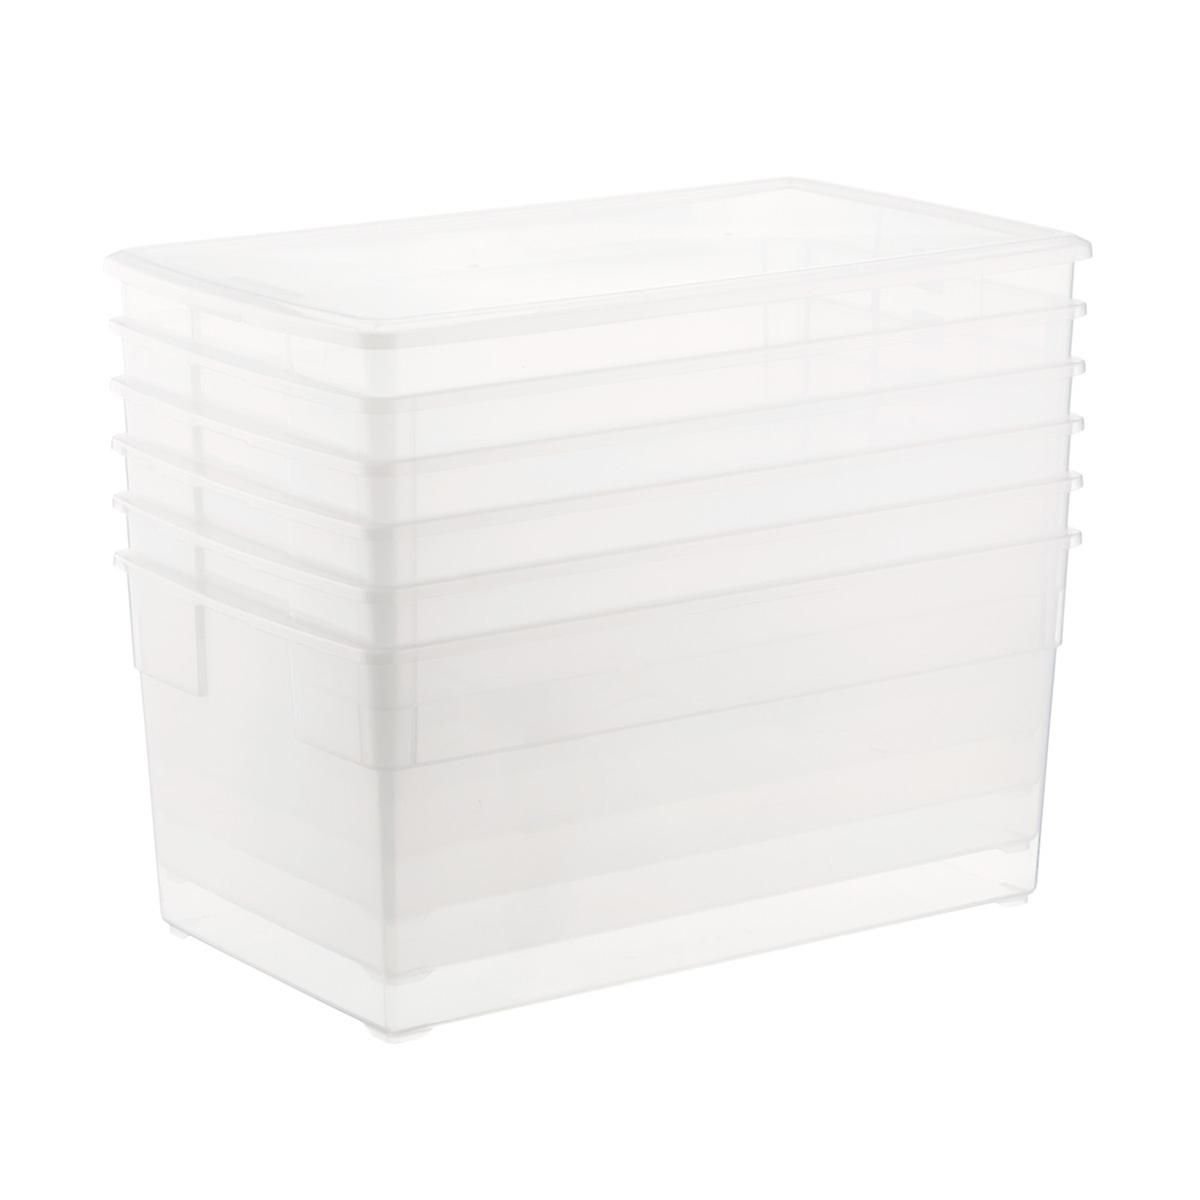 Case of 6 Our Boot Boxes | The Container Store